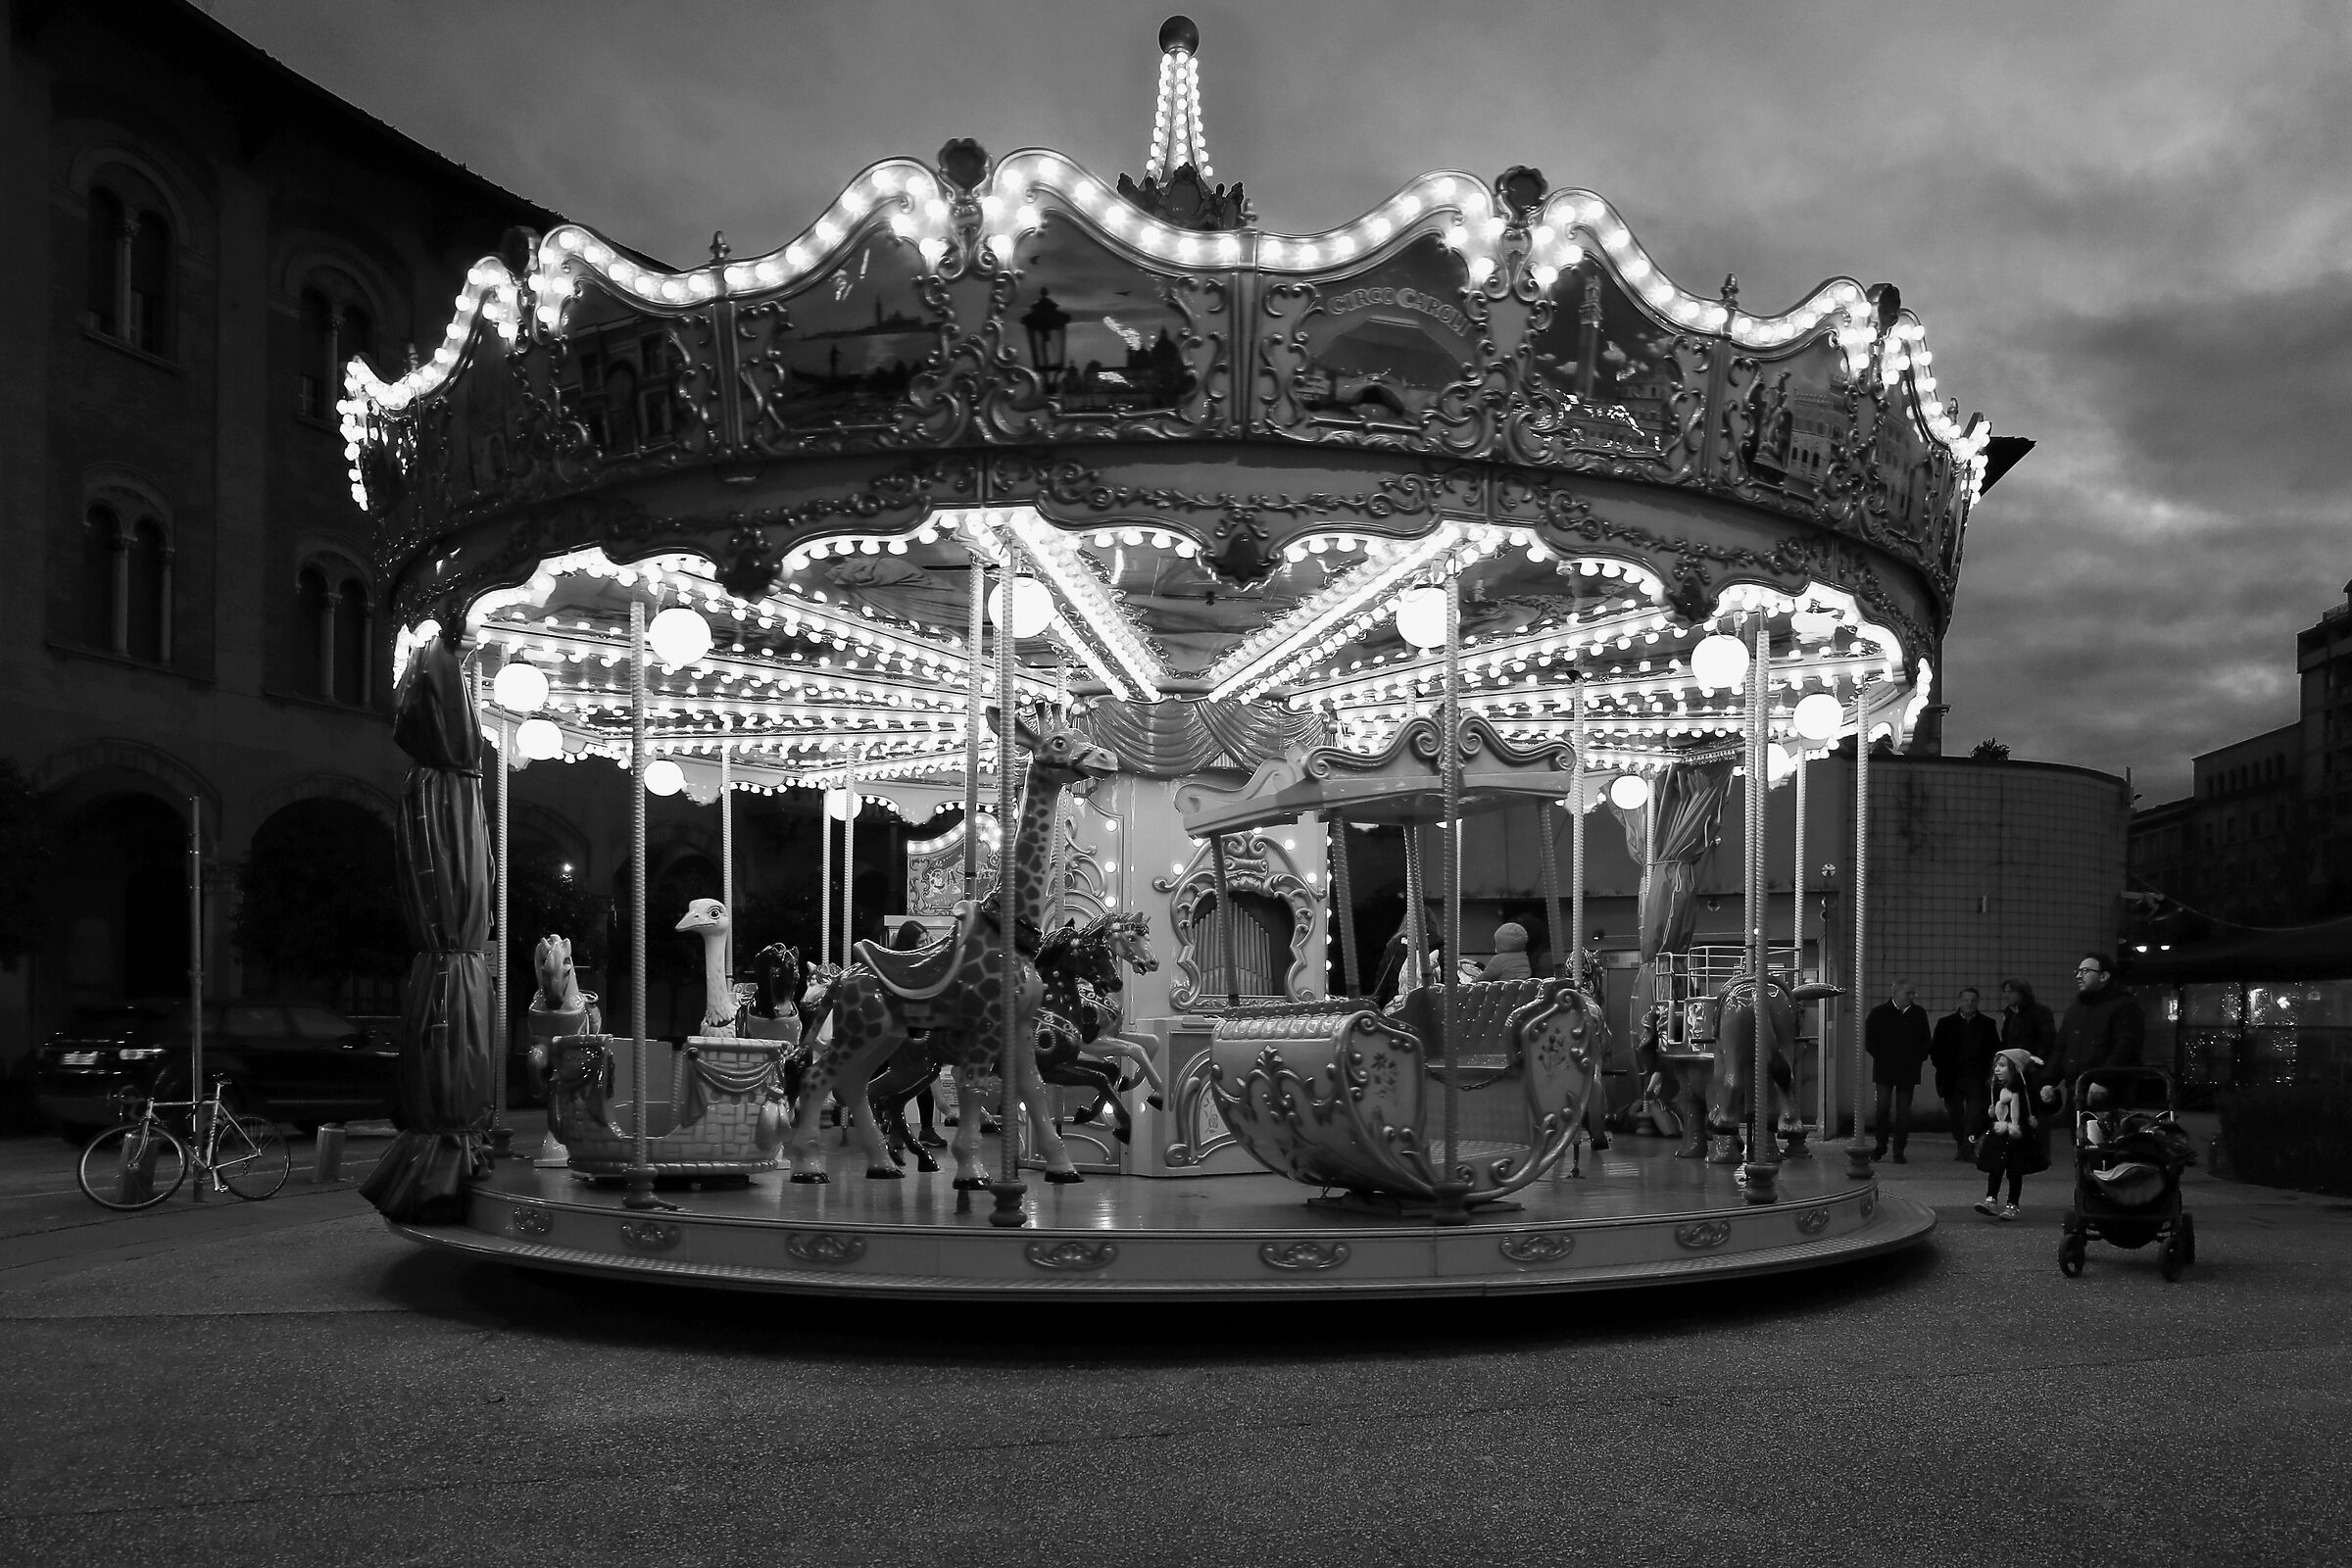 The discreet charm of the carousel...